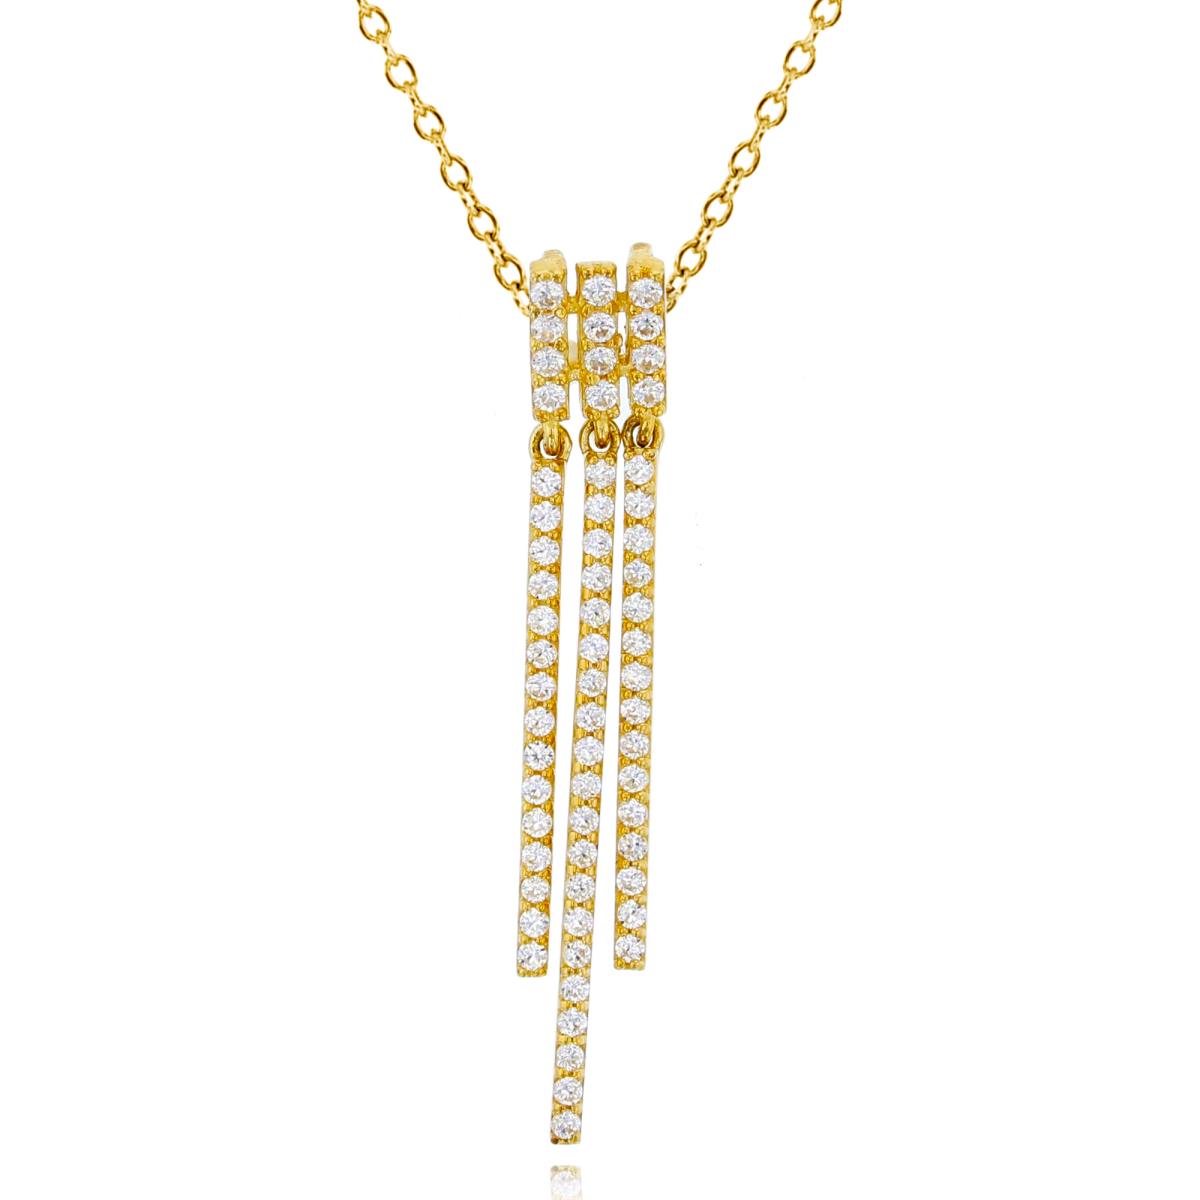 10K Yellow Gold Rnd CZ 3-Dangling Vertical Rows 18"Necklace